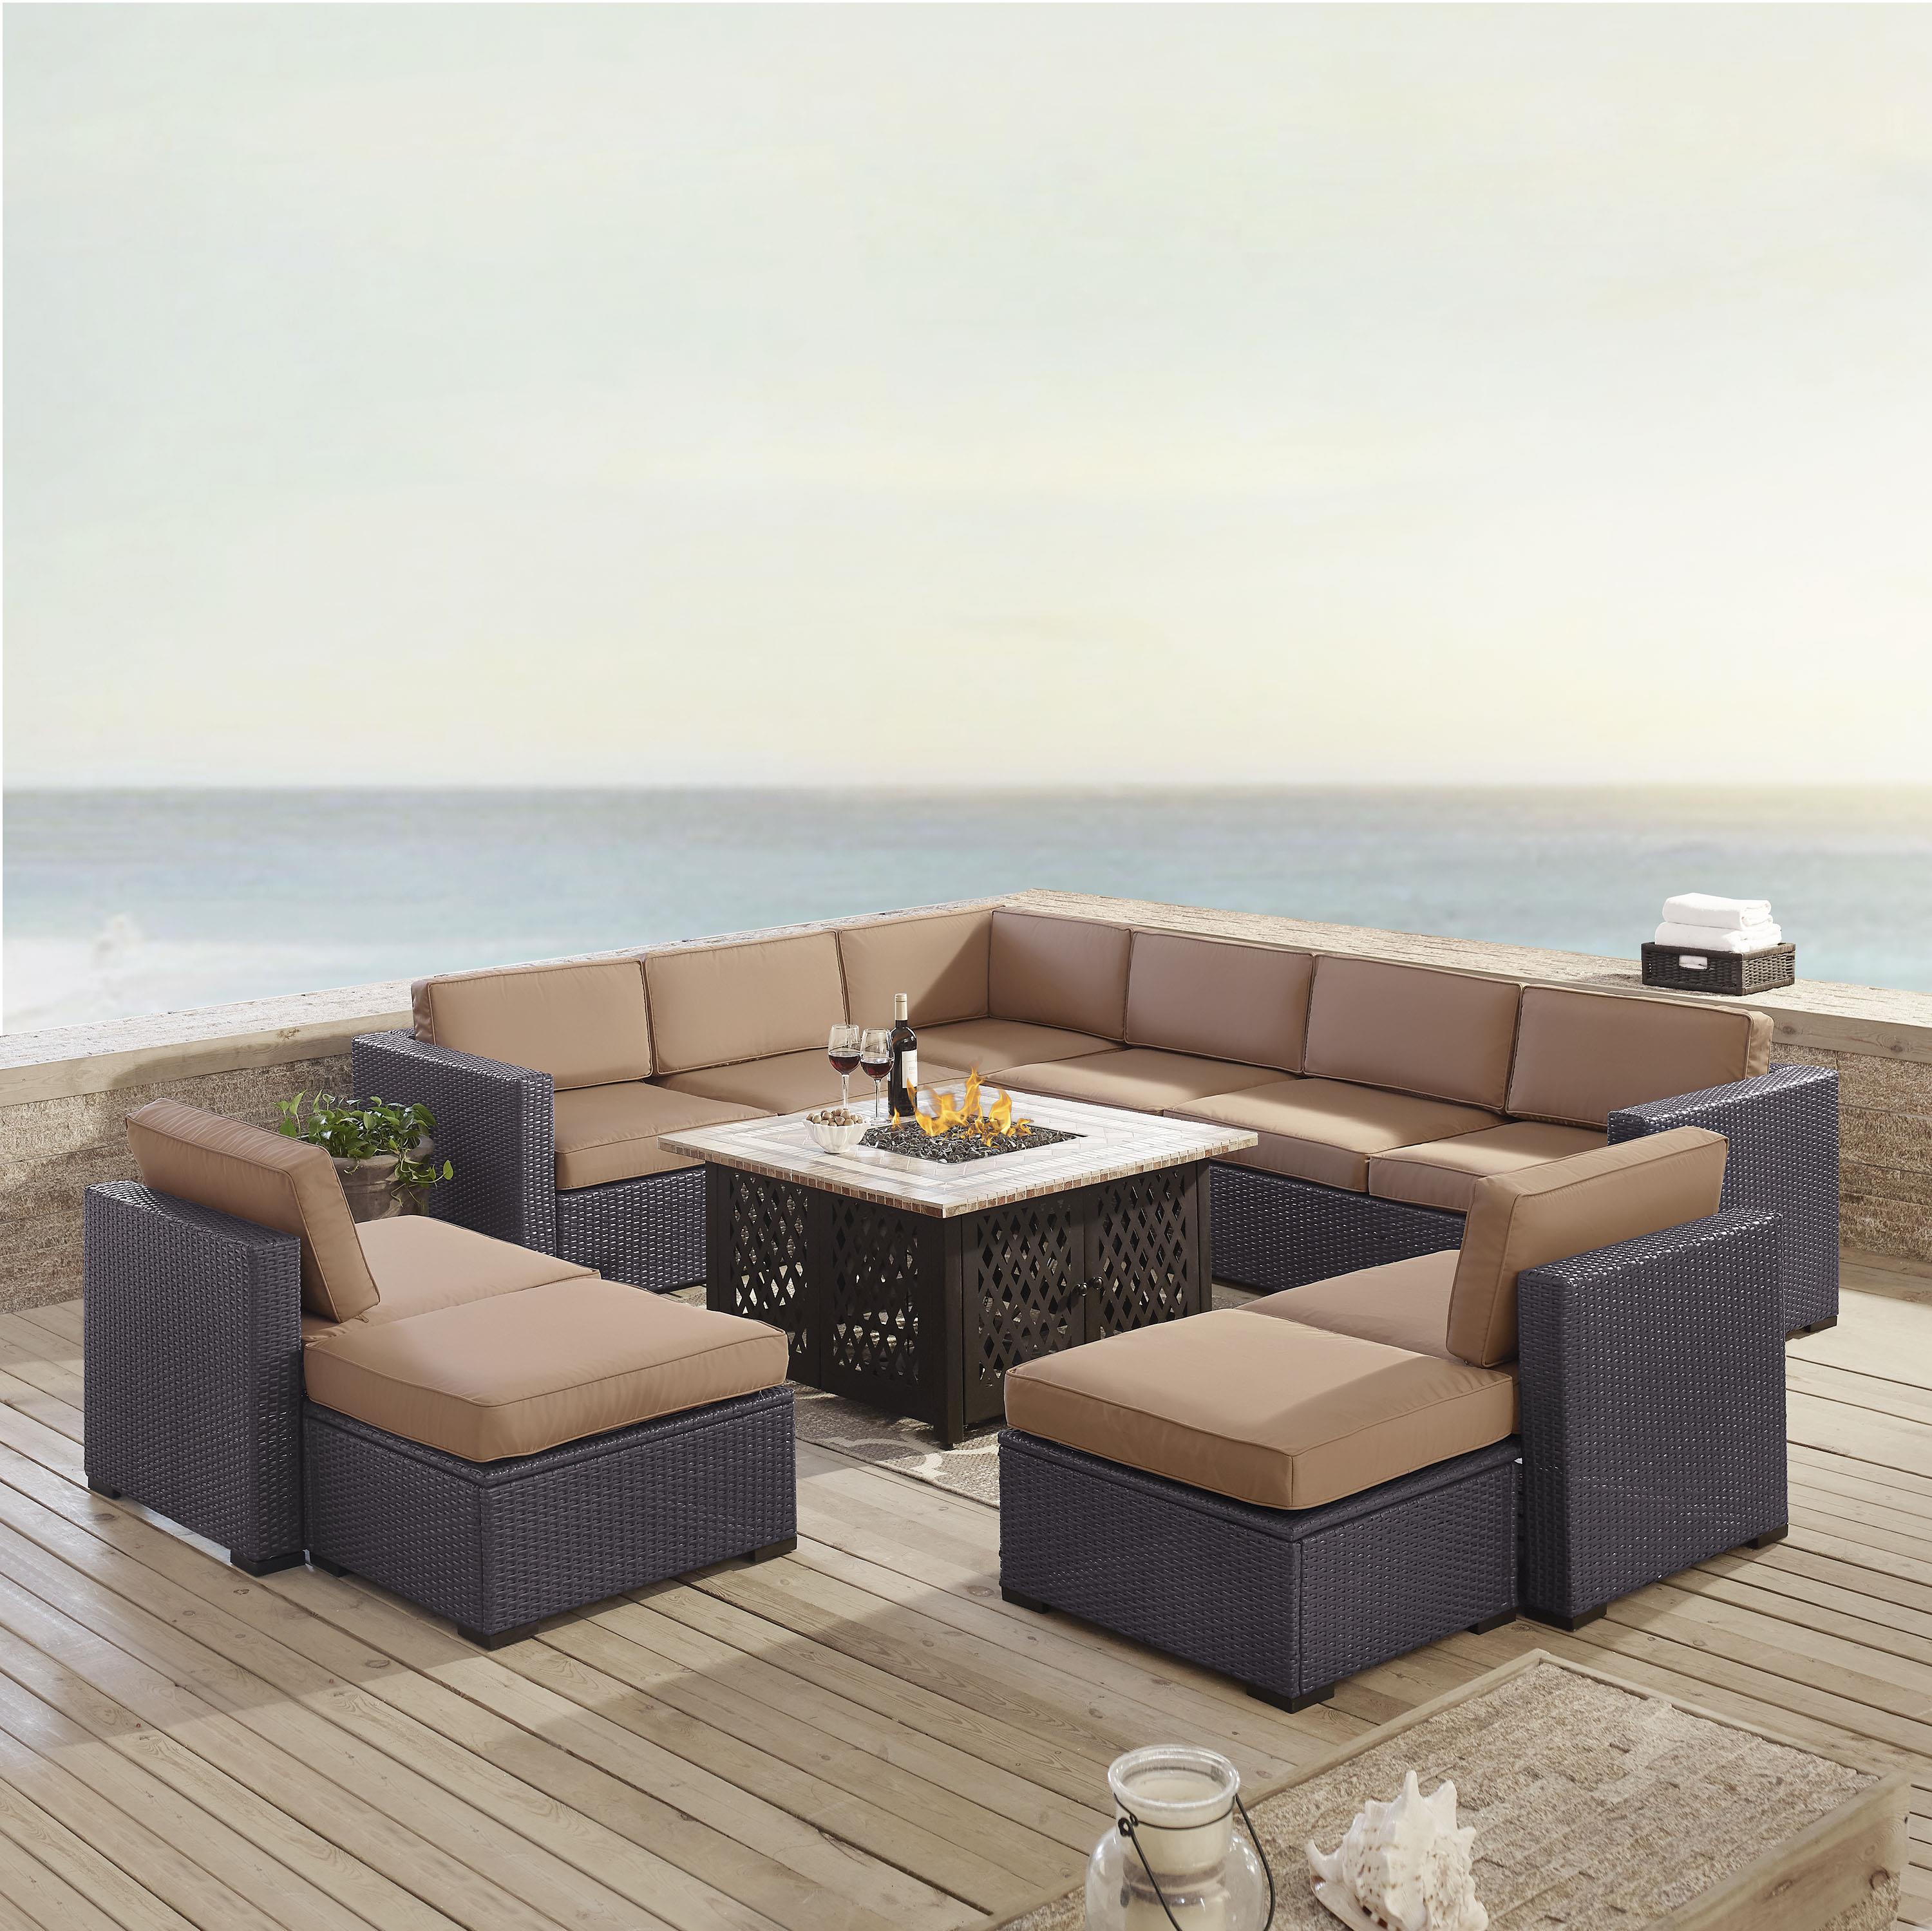 Crosley Furniture Biscayne 8 Piece Fabric Patio Fire Pit Sectional Set in Mocha - image 4 of 4